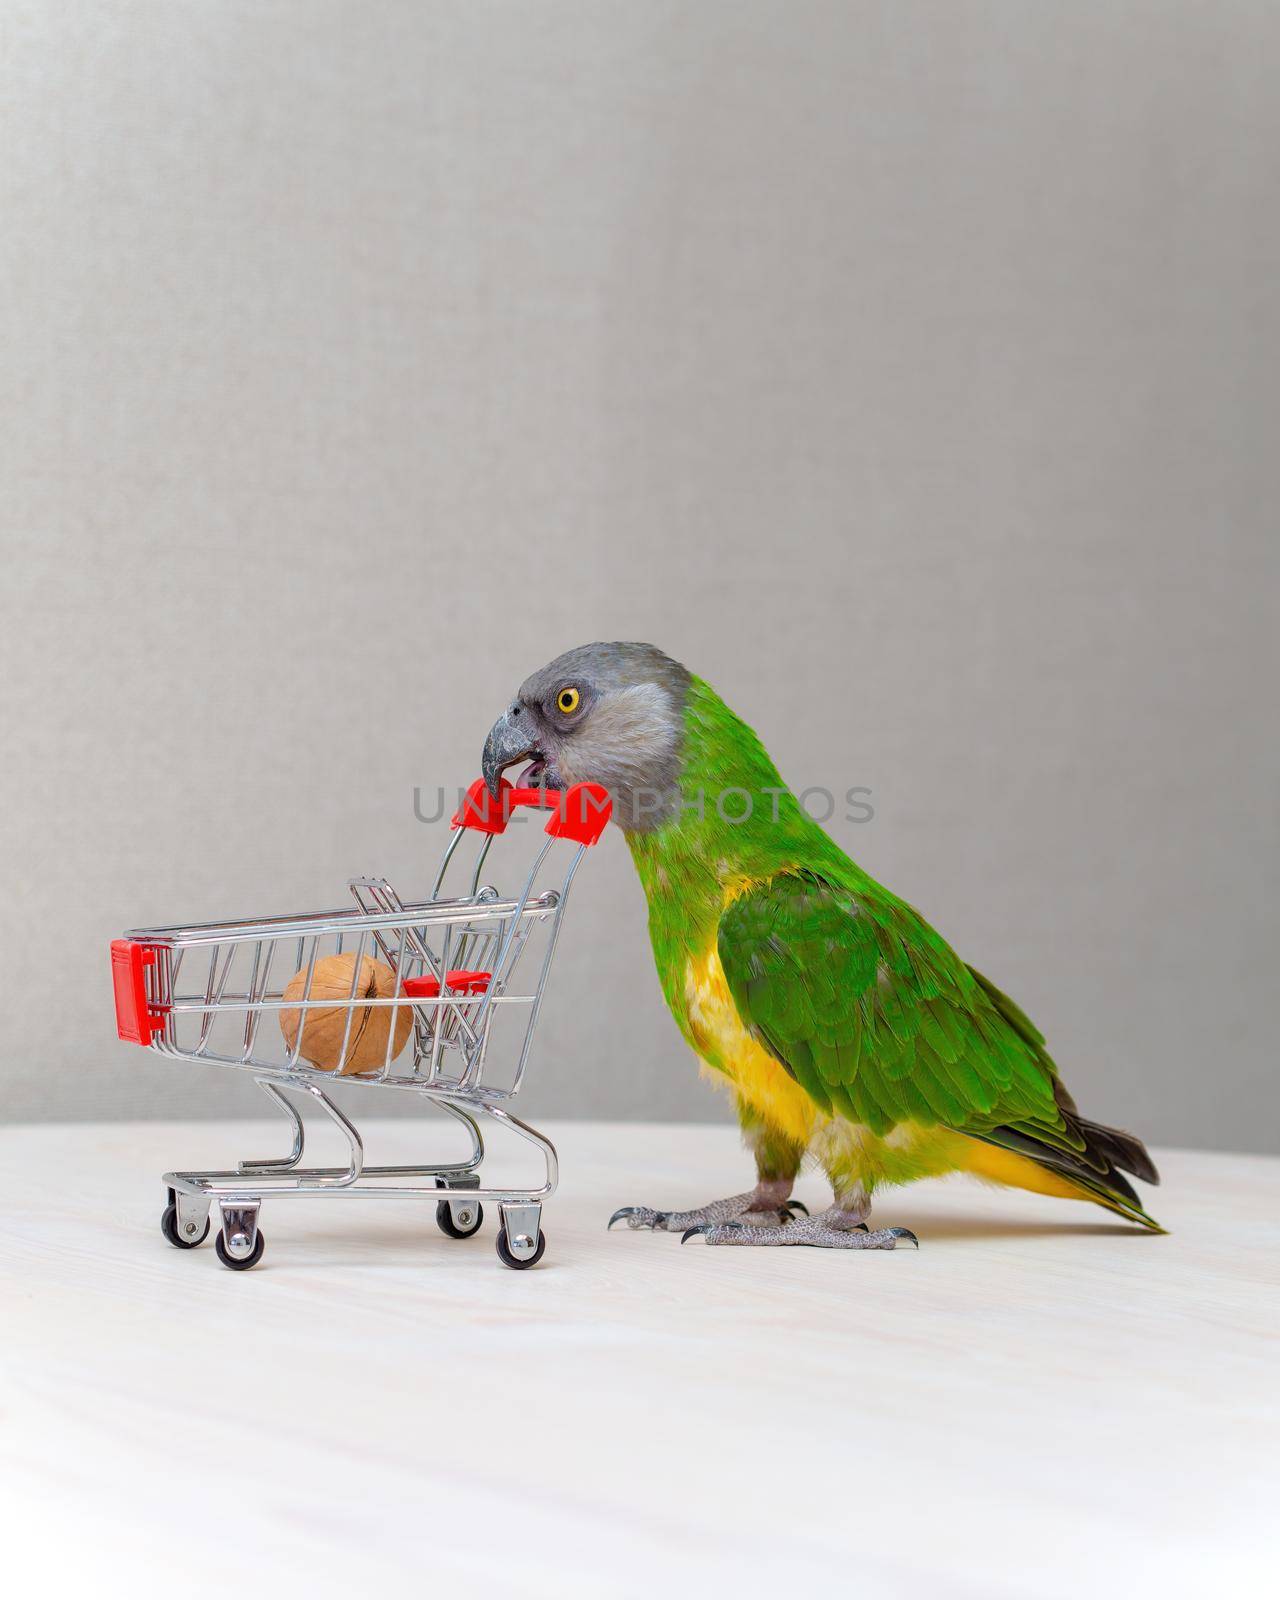 Poicephalus senegalus. Senegalese parrot with a shopping cart. there is a walnut in the shopping cart. photo